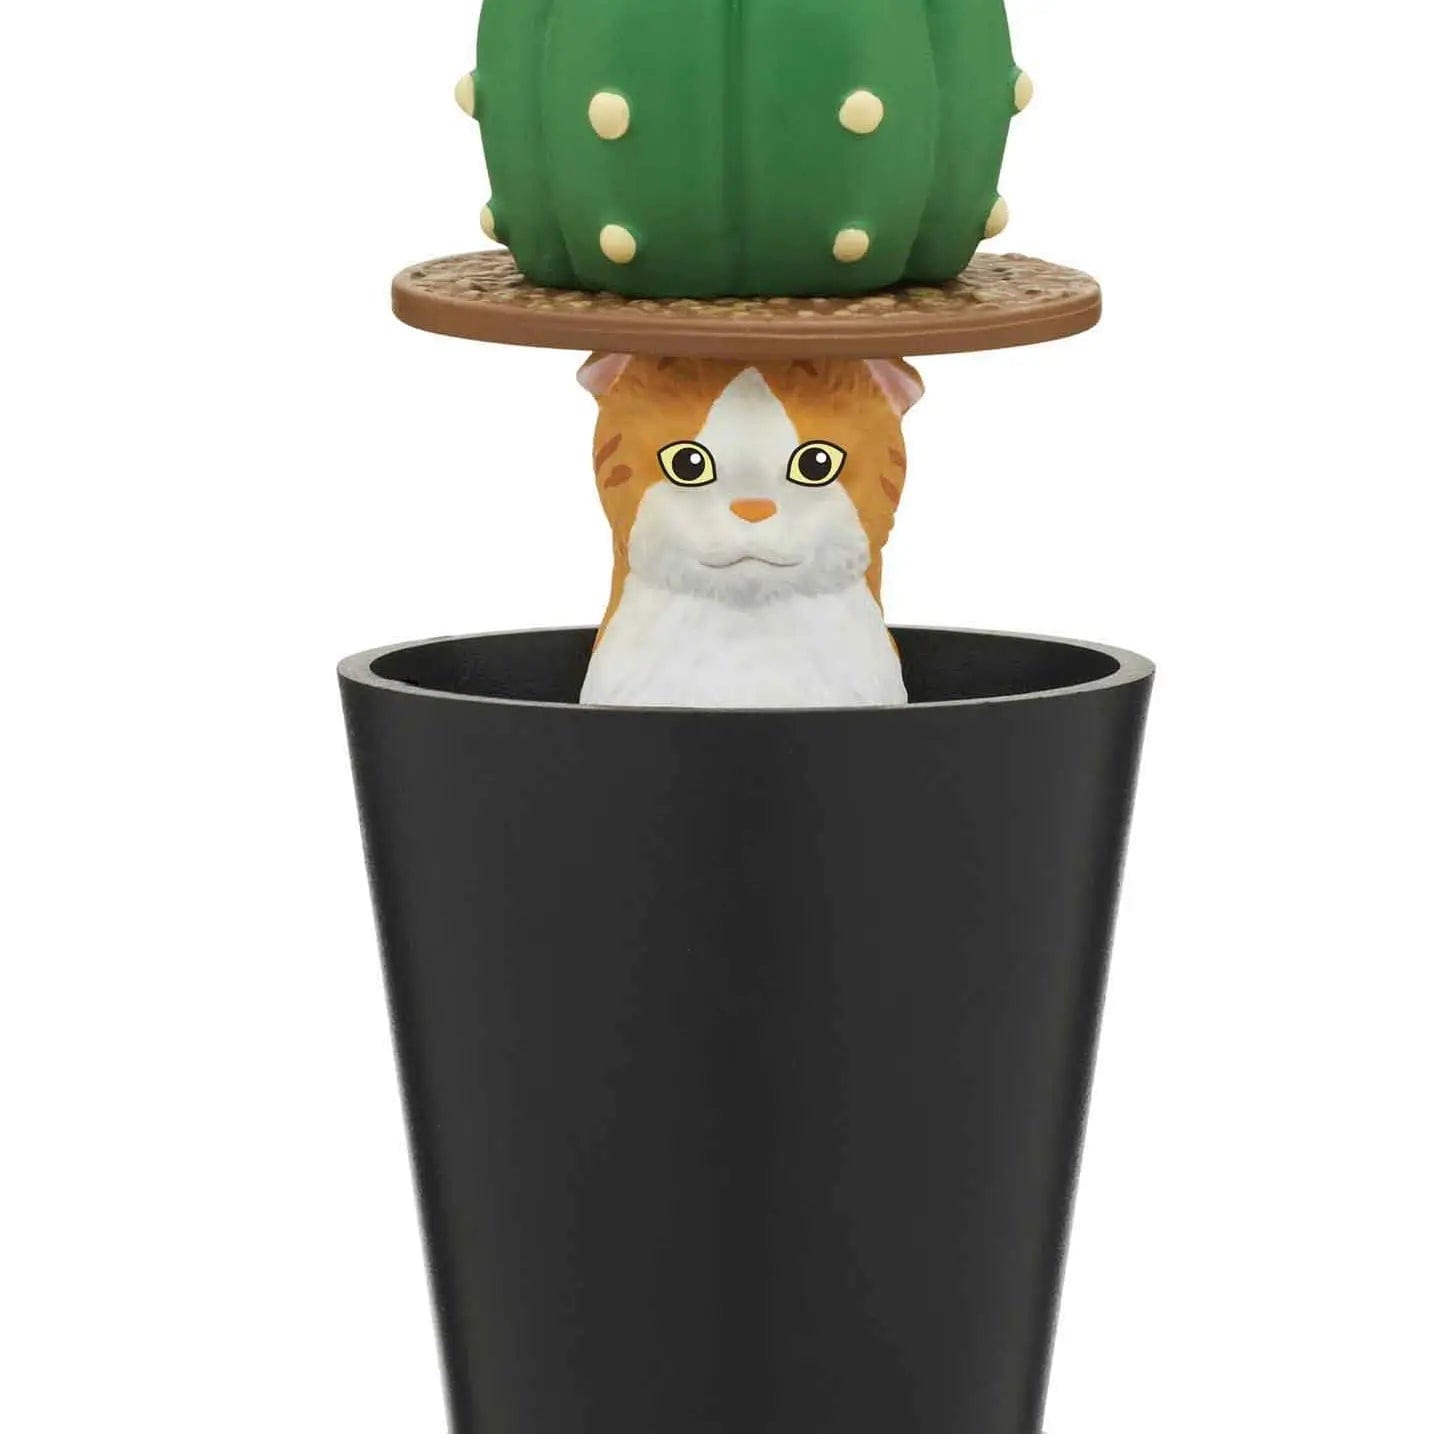 clever-idiots-toy-cat-peek-planter-blind